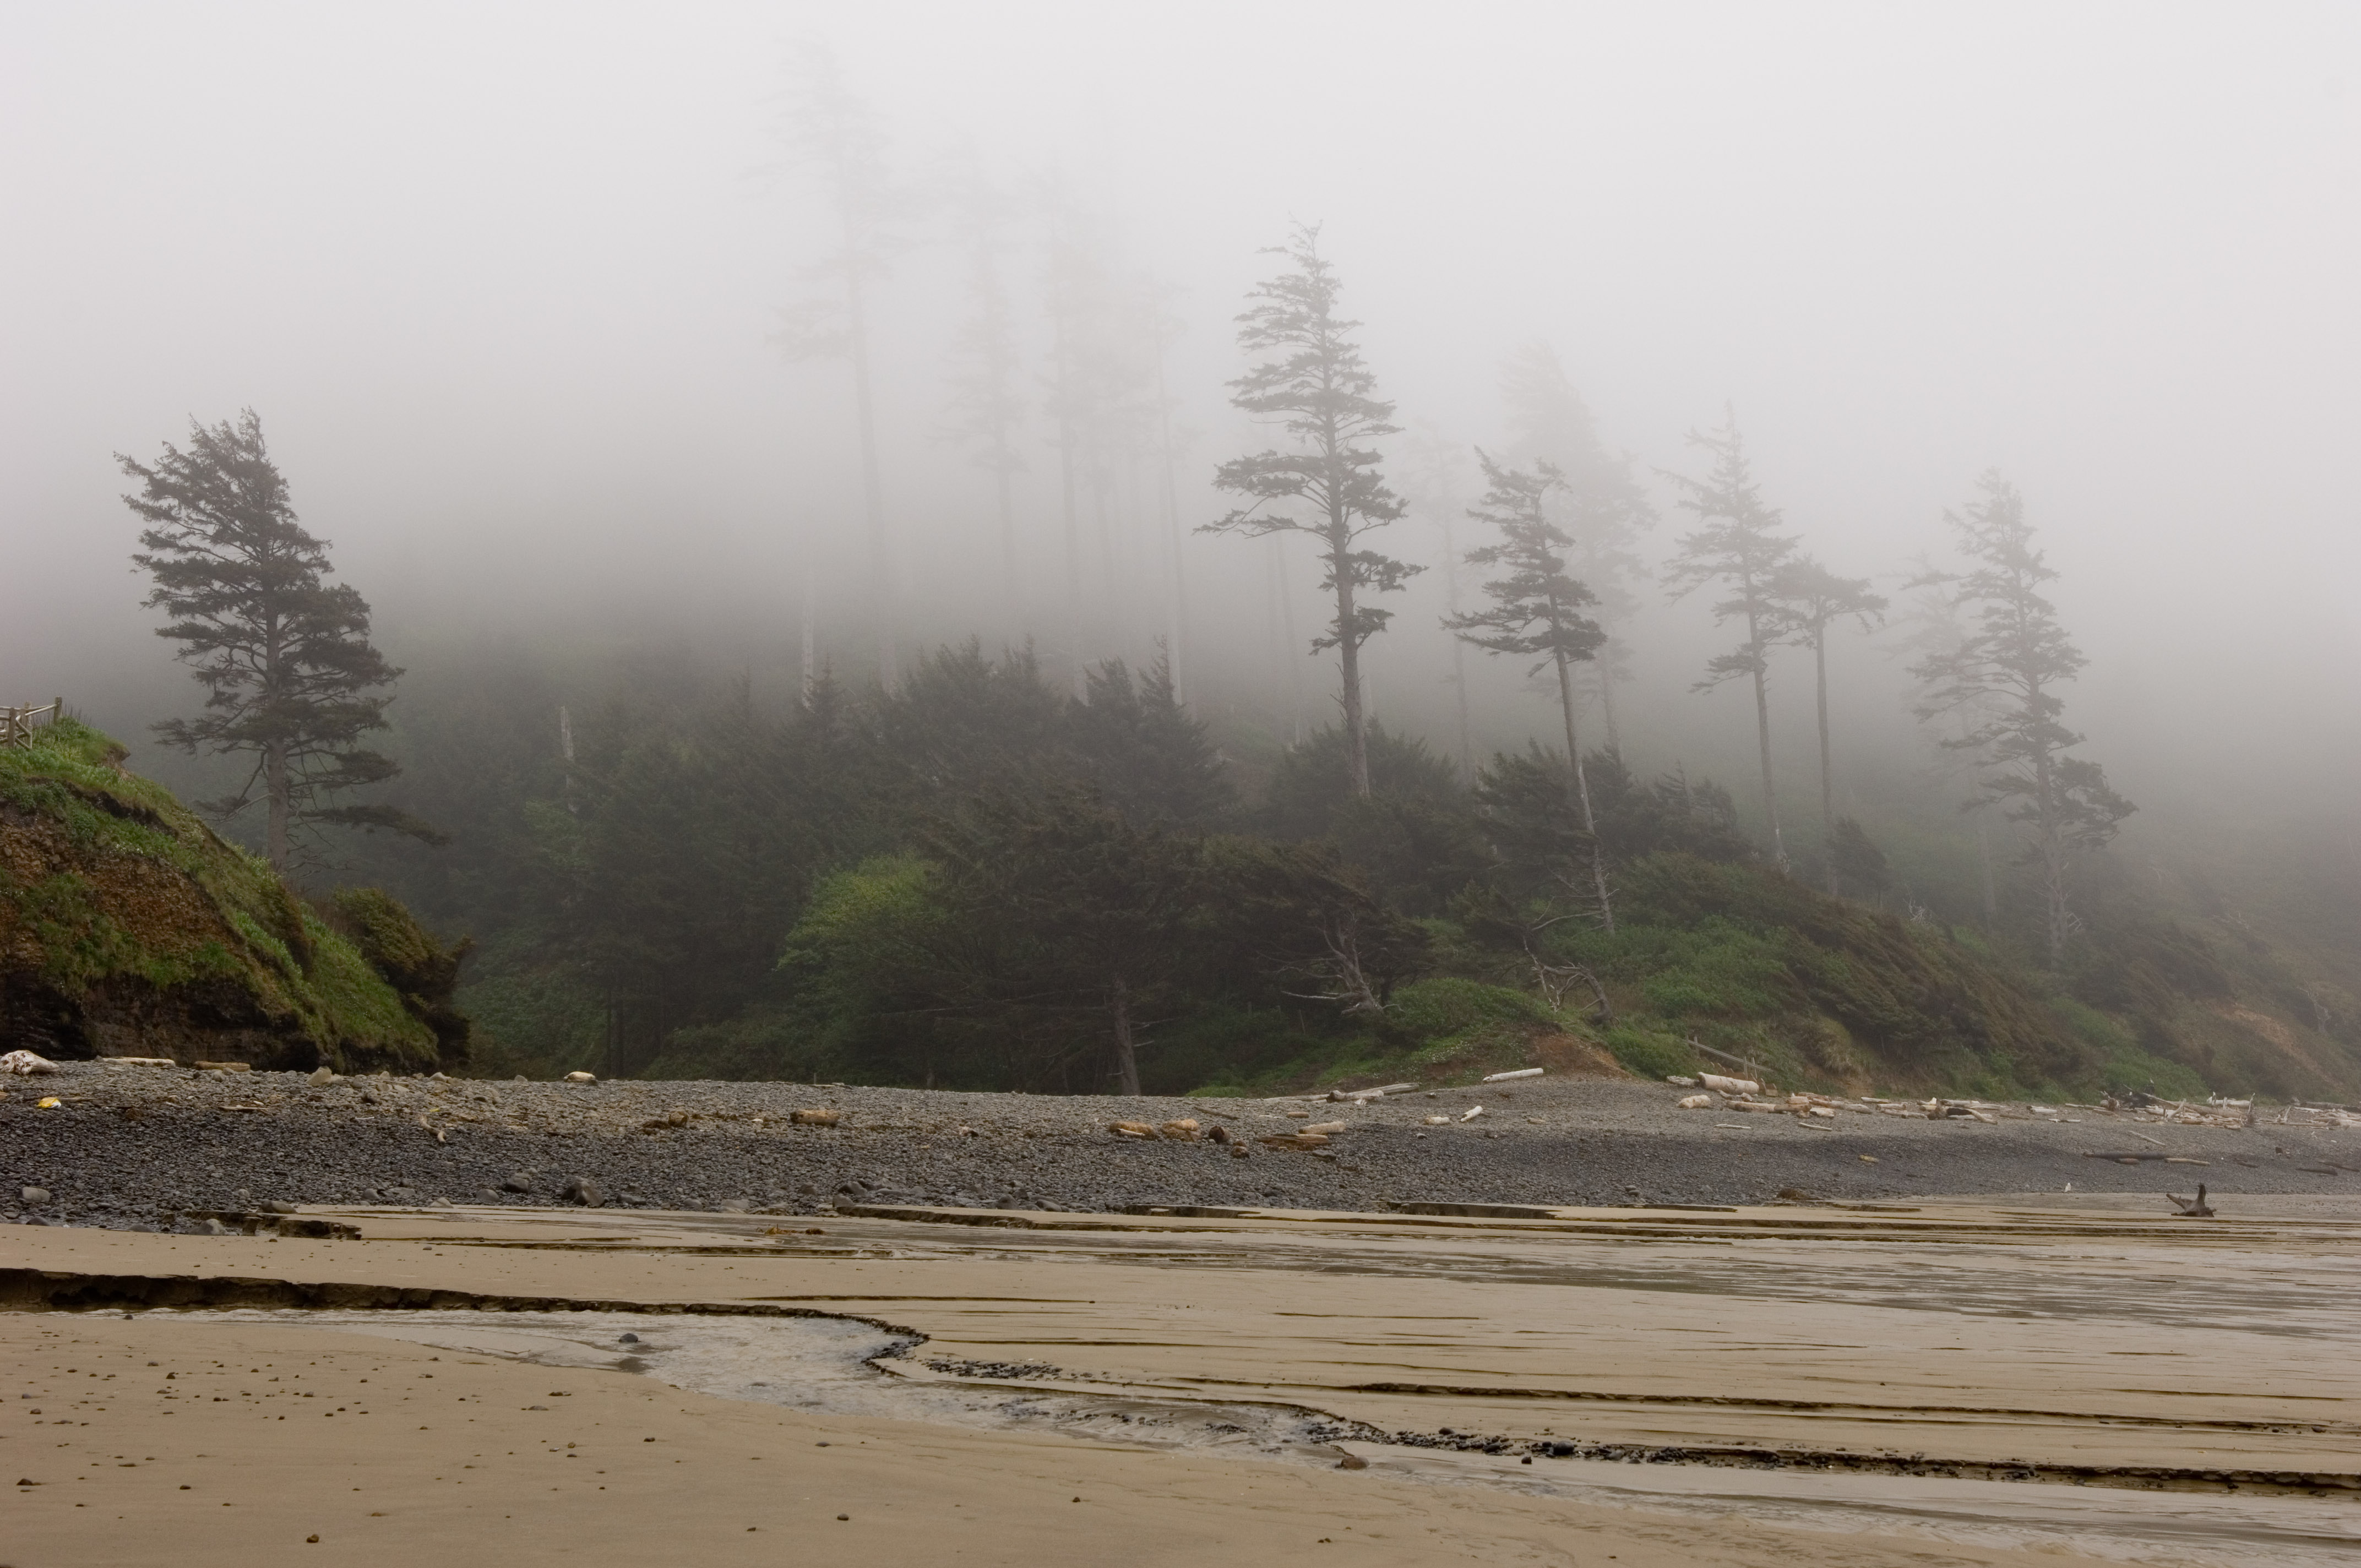 The beach. It is foggy up on the hill where there are trees.